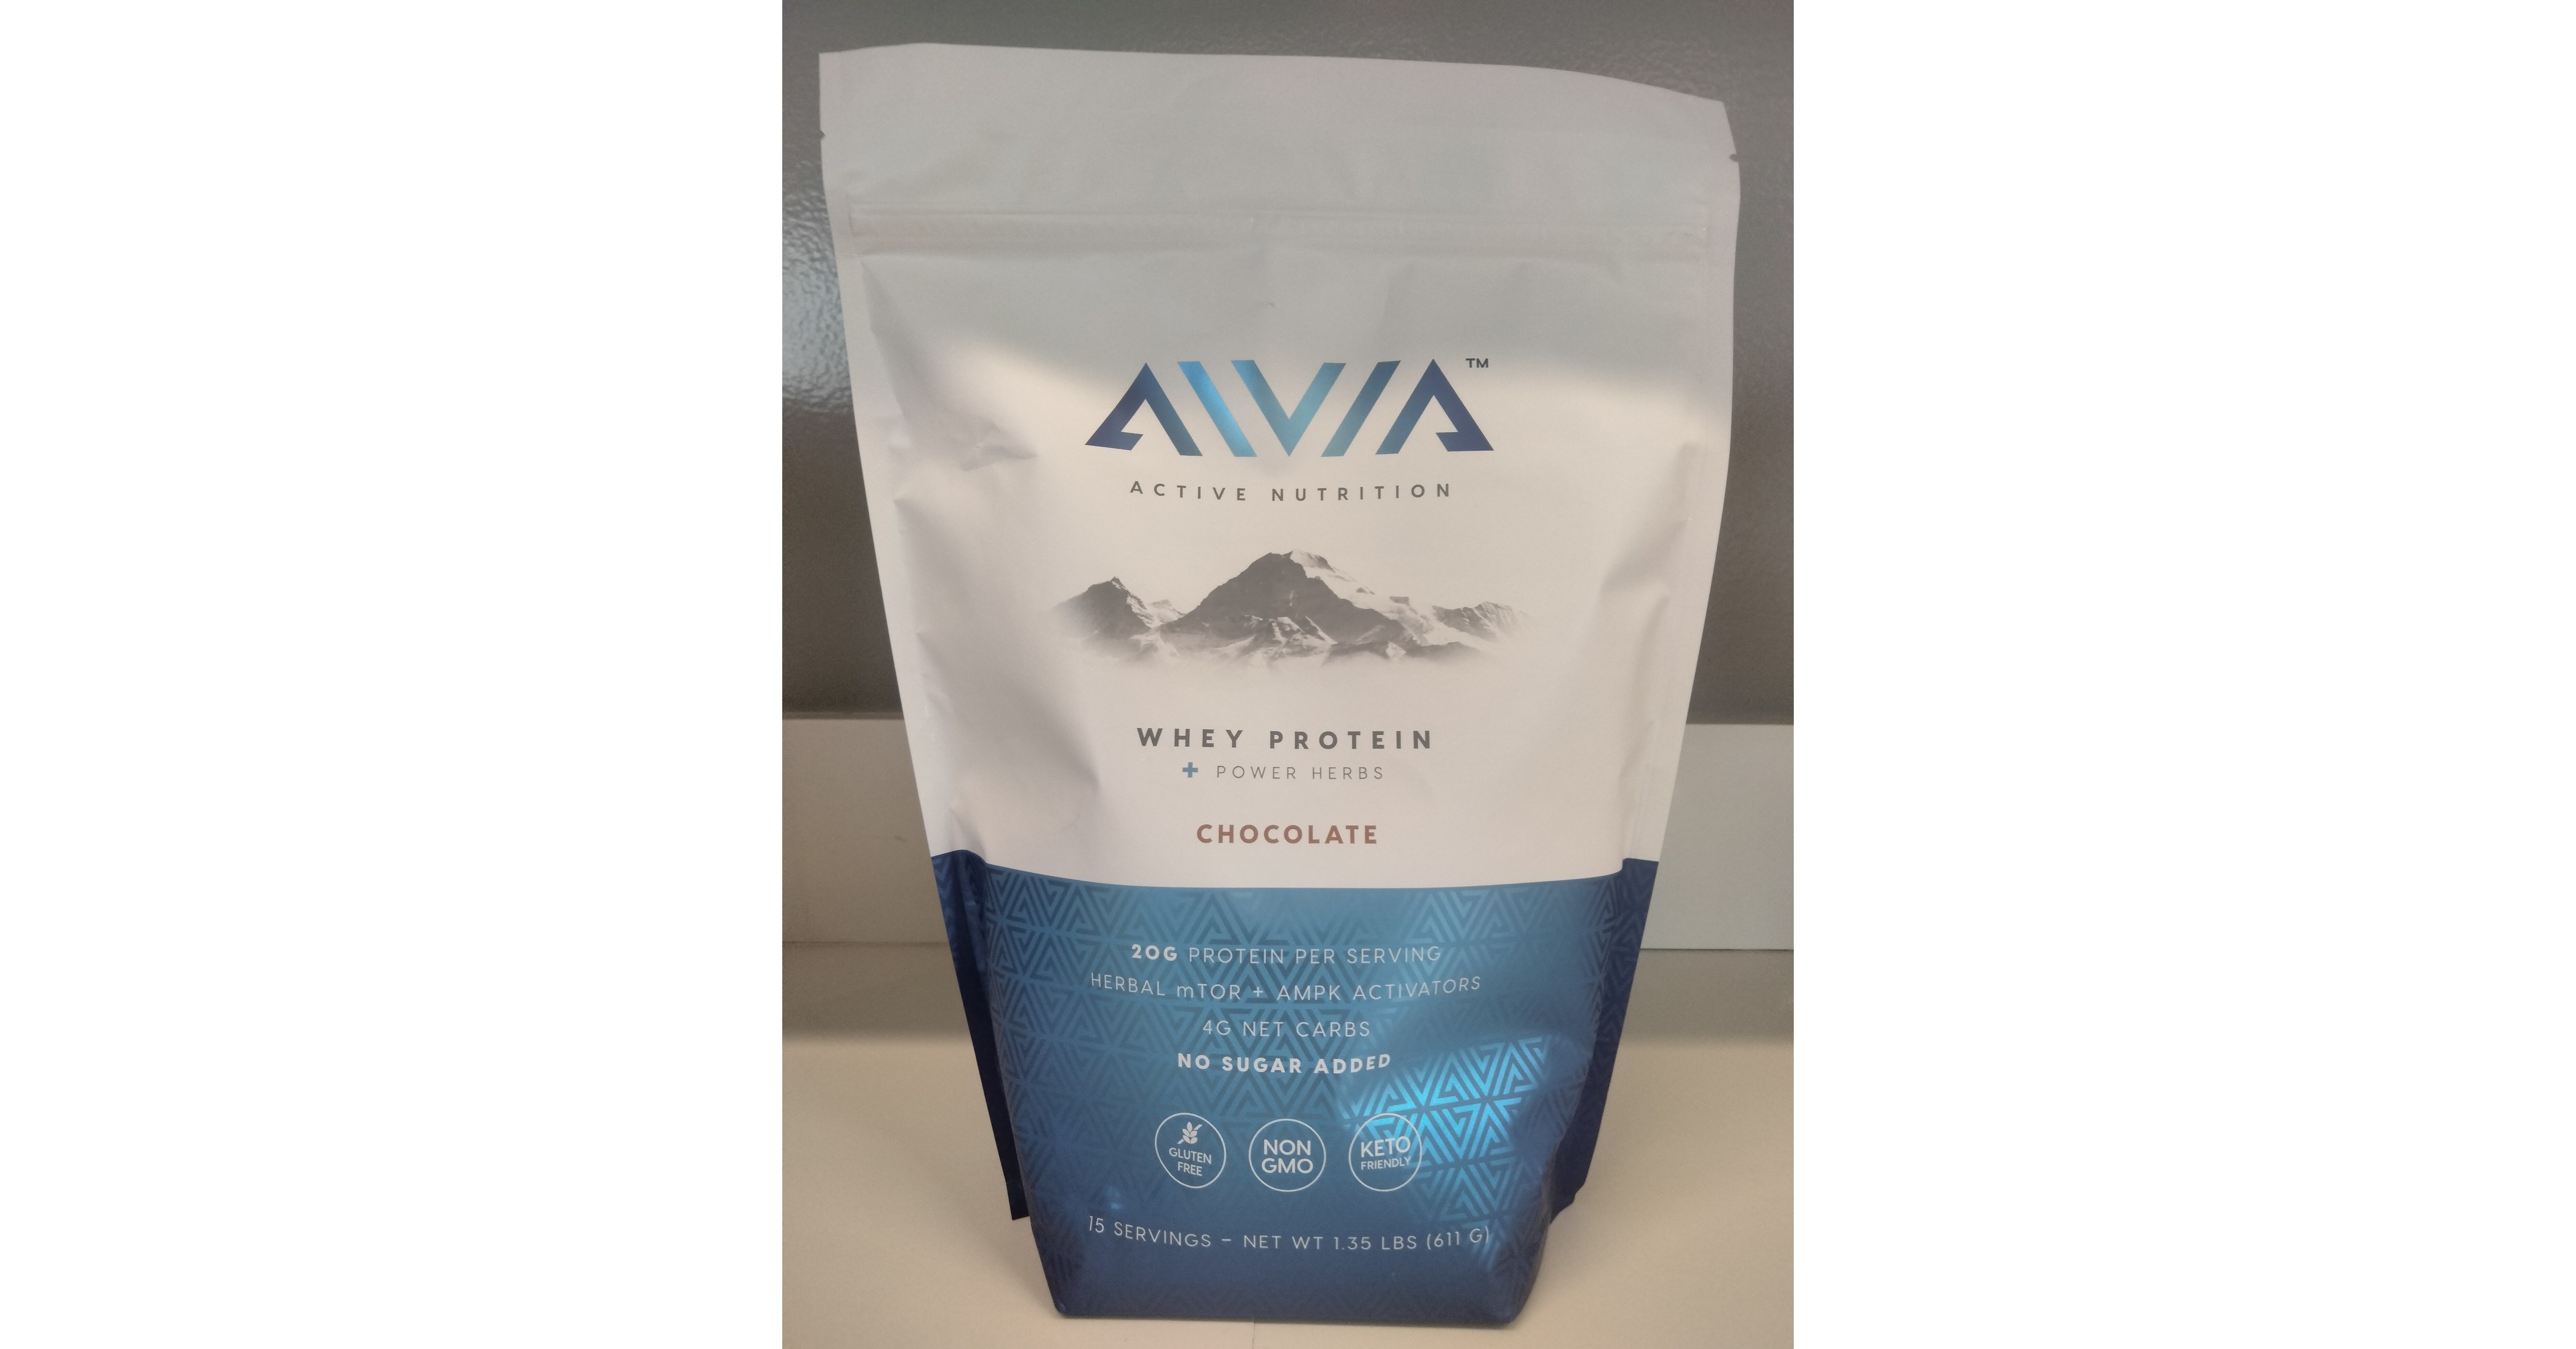 NATURE’S SUNSHINE PRODUCTS INC. ISSUES ALLERGY ALERT ON UNDECLARED MILK IN AIVIA WHEY PROTEIN + POWER HERBS MEAL REPLACEMENT SHAKES